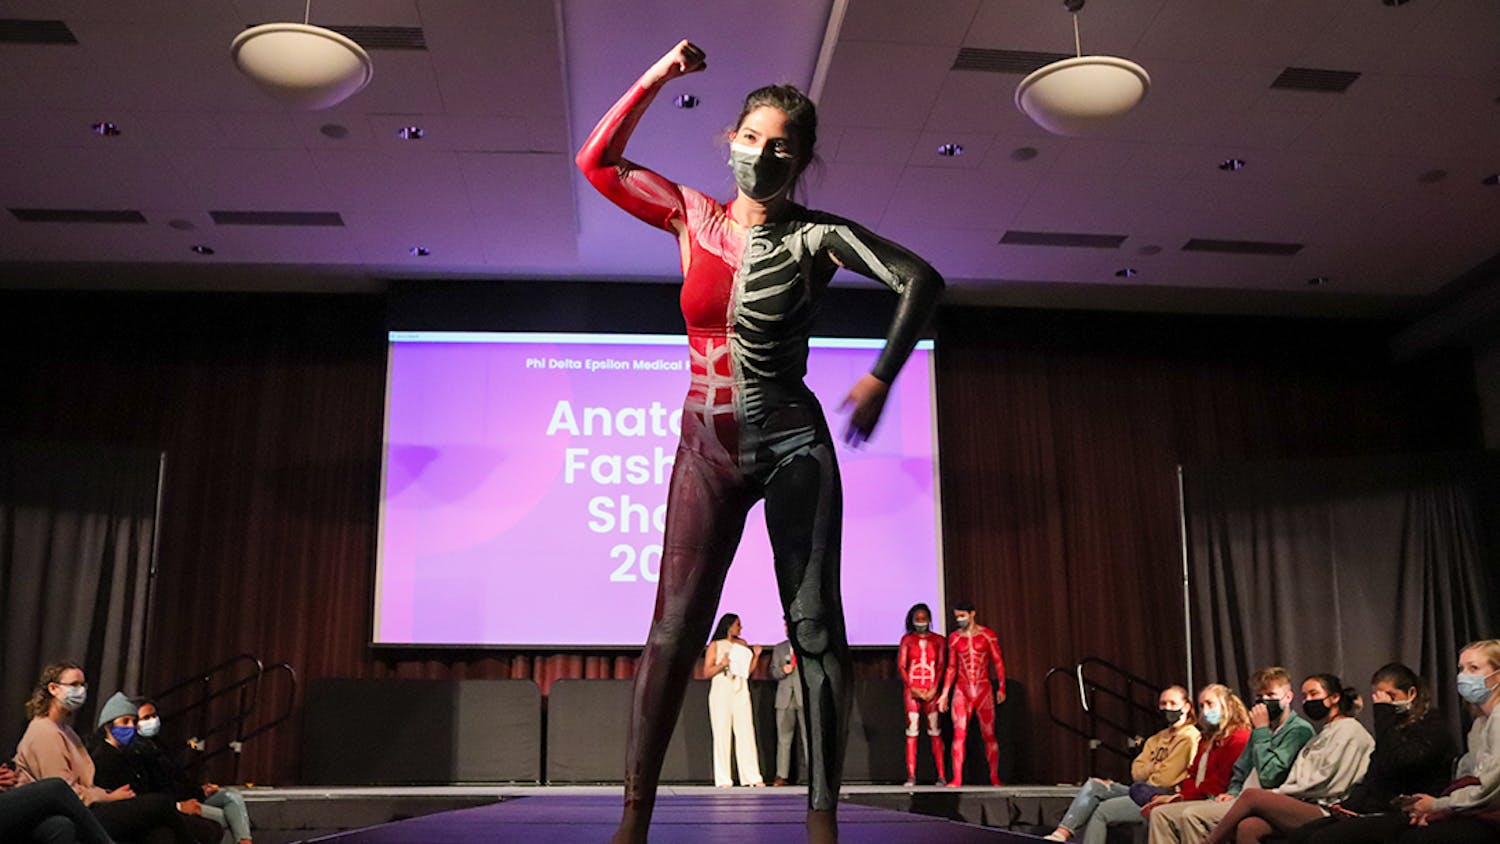 A model, painted with the muscular system on one half of the body and the skeletal system on the other half, walks the runway at the Phi Delta Epsilon's annual Anatomy Fashion Show, an event combining medical education with art to fundraise for the Children's Miracle Network.